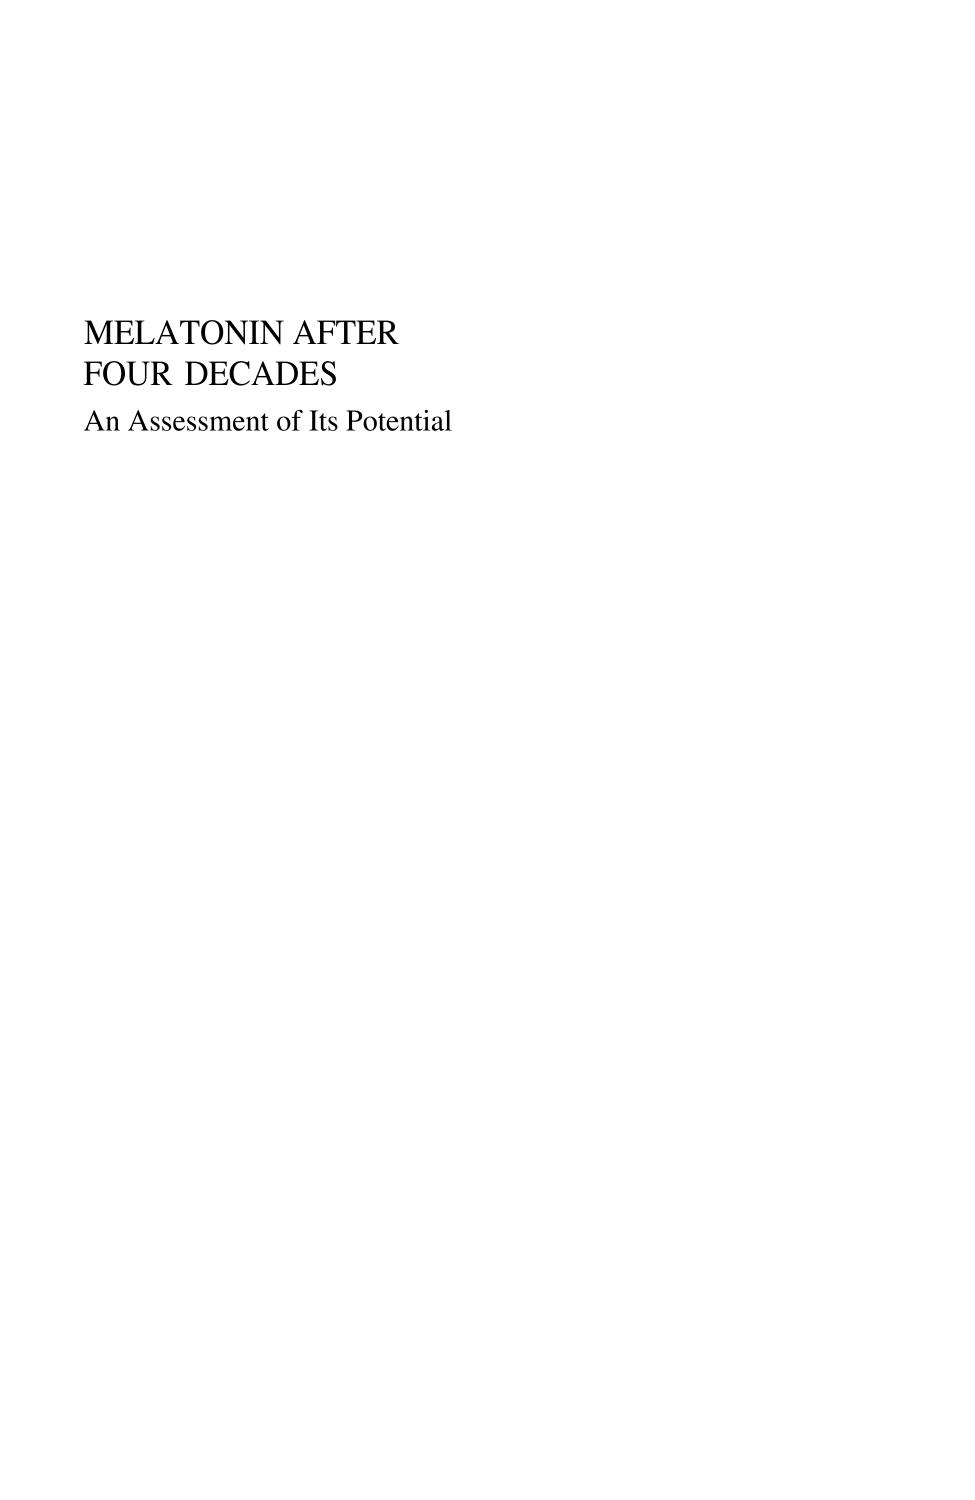 Melatonin after four decades : an assessment of its potential